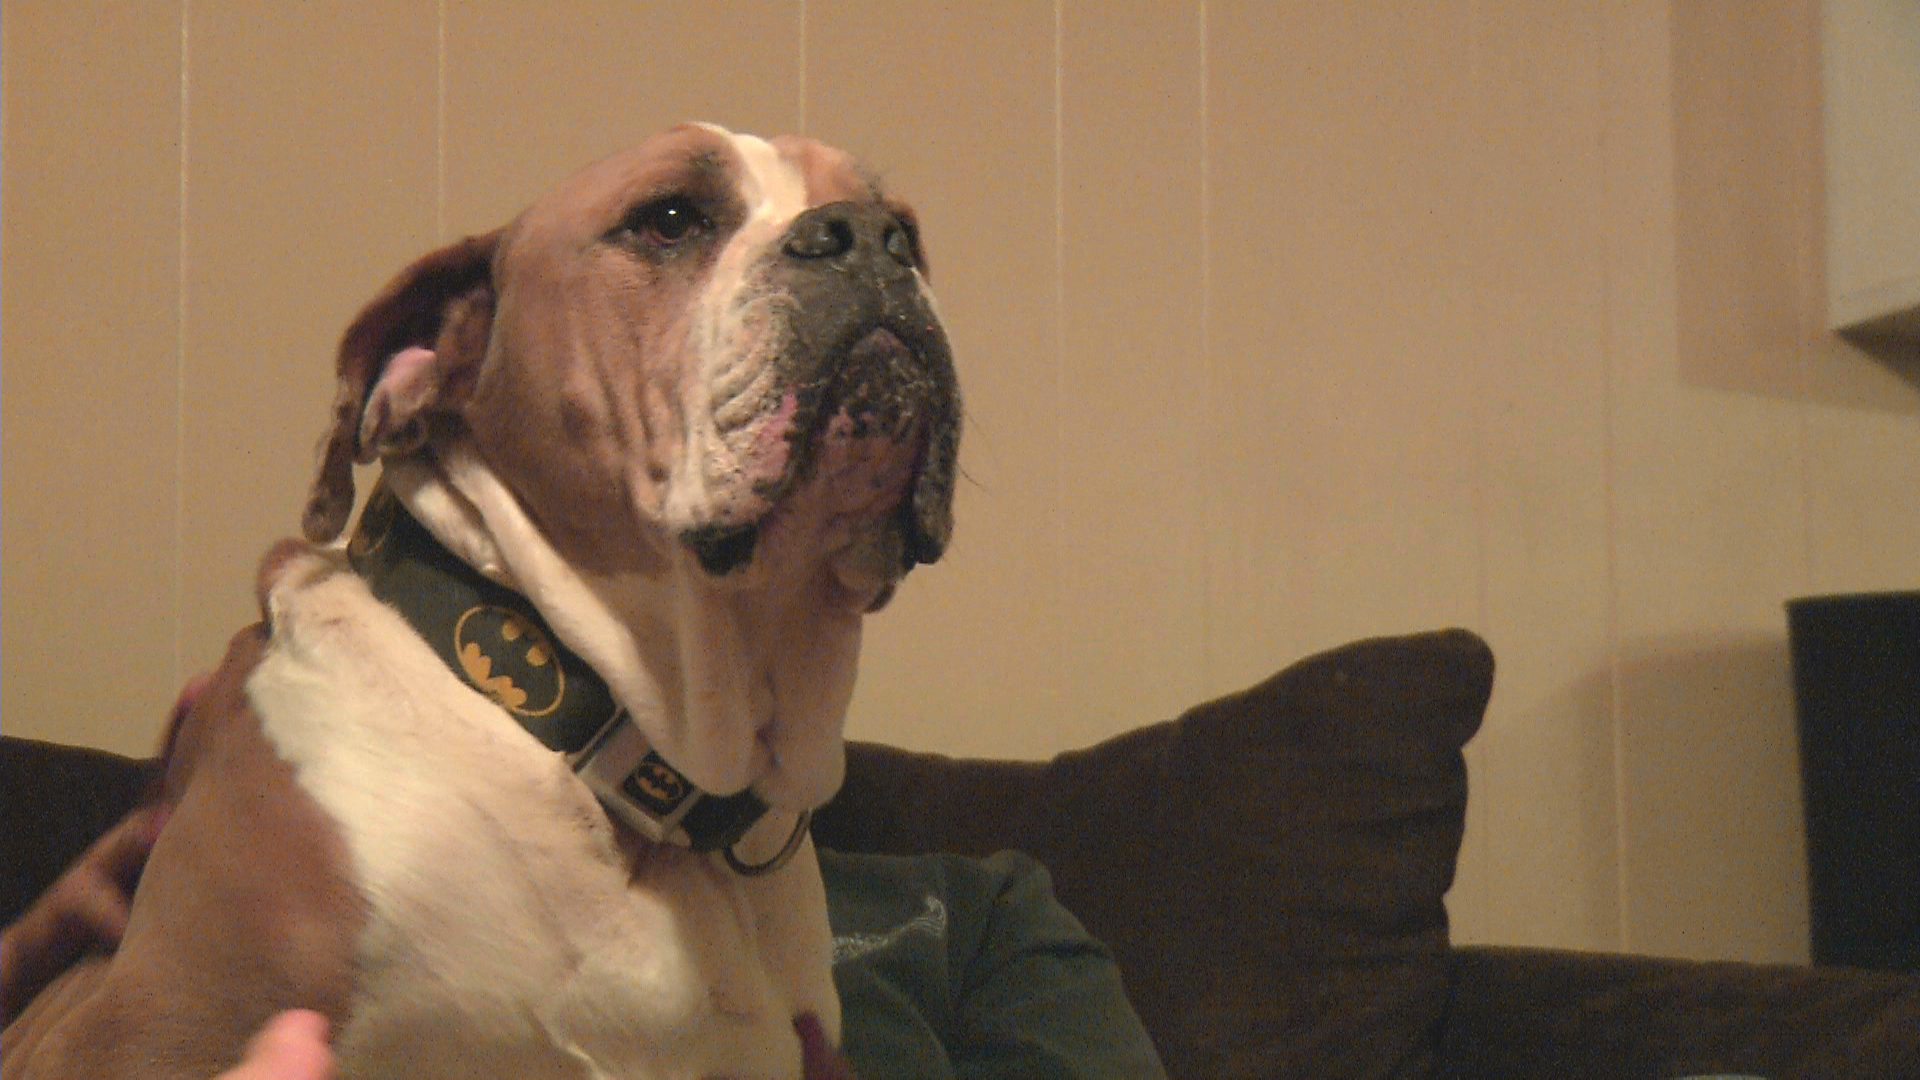 A family in Robinson was worried last week when their Bull Mastiff escaped from their backyard. Little did they know that when Cooter Brown returned, their family would get bigger.